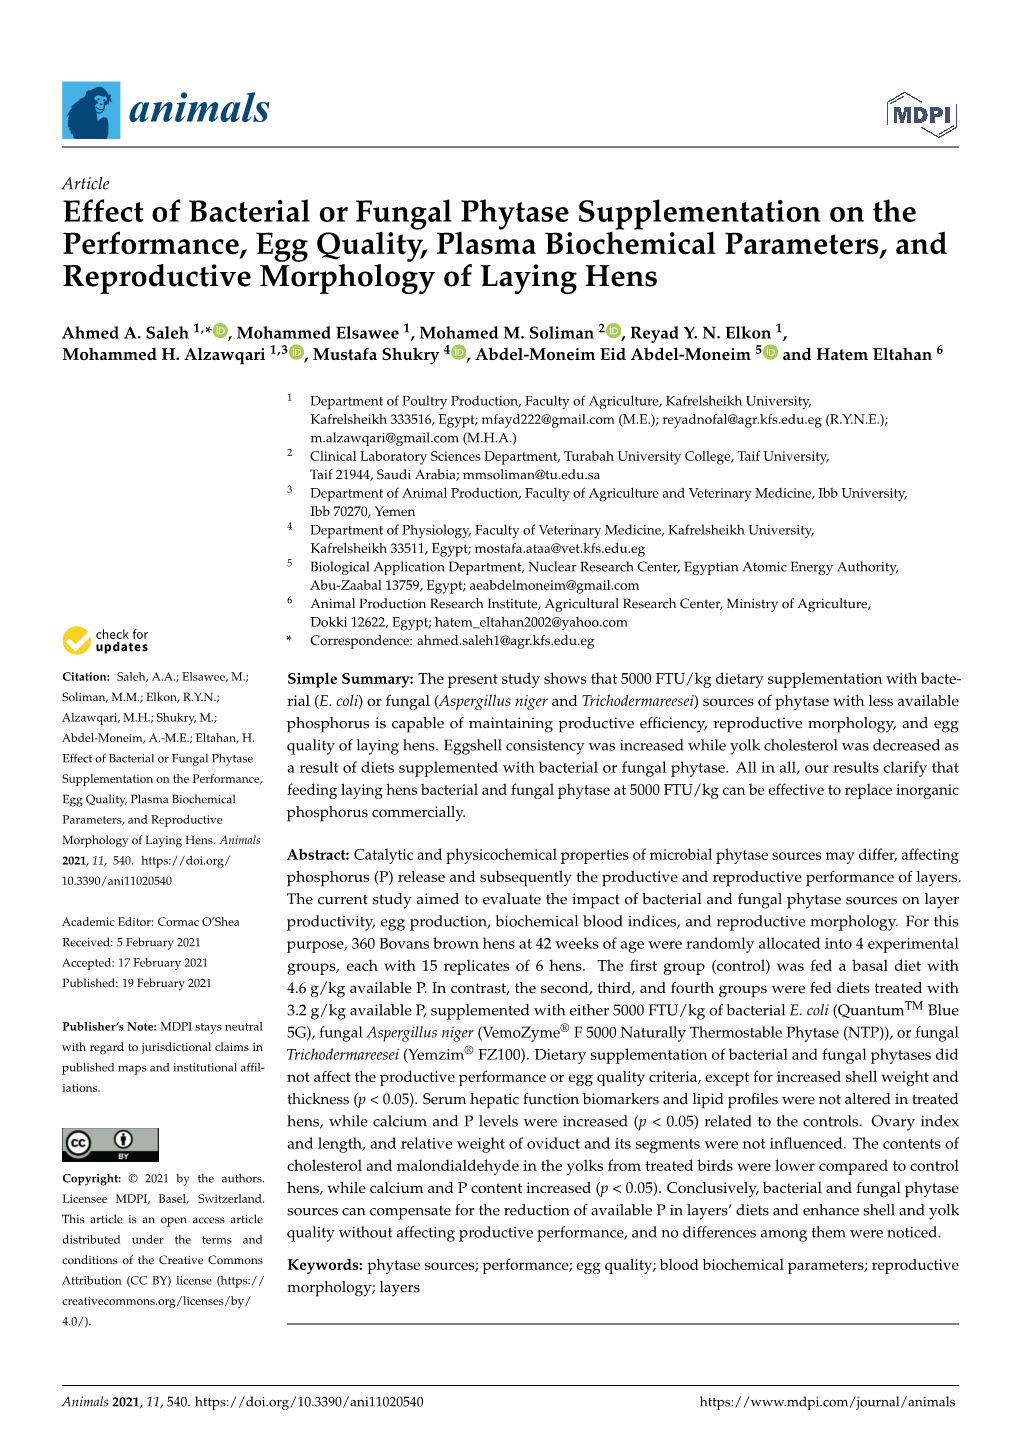 Effect of Bacterial Or Fungal Phytase Supplementation on the Performance, Egg Quality, Plasma Biochemical Parameters, and Reproductive Morphology of Laying Hens